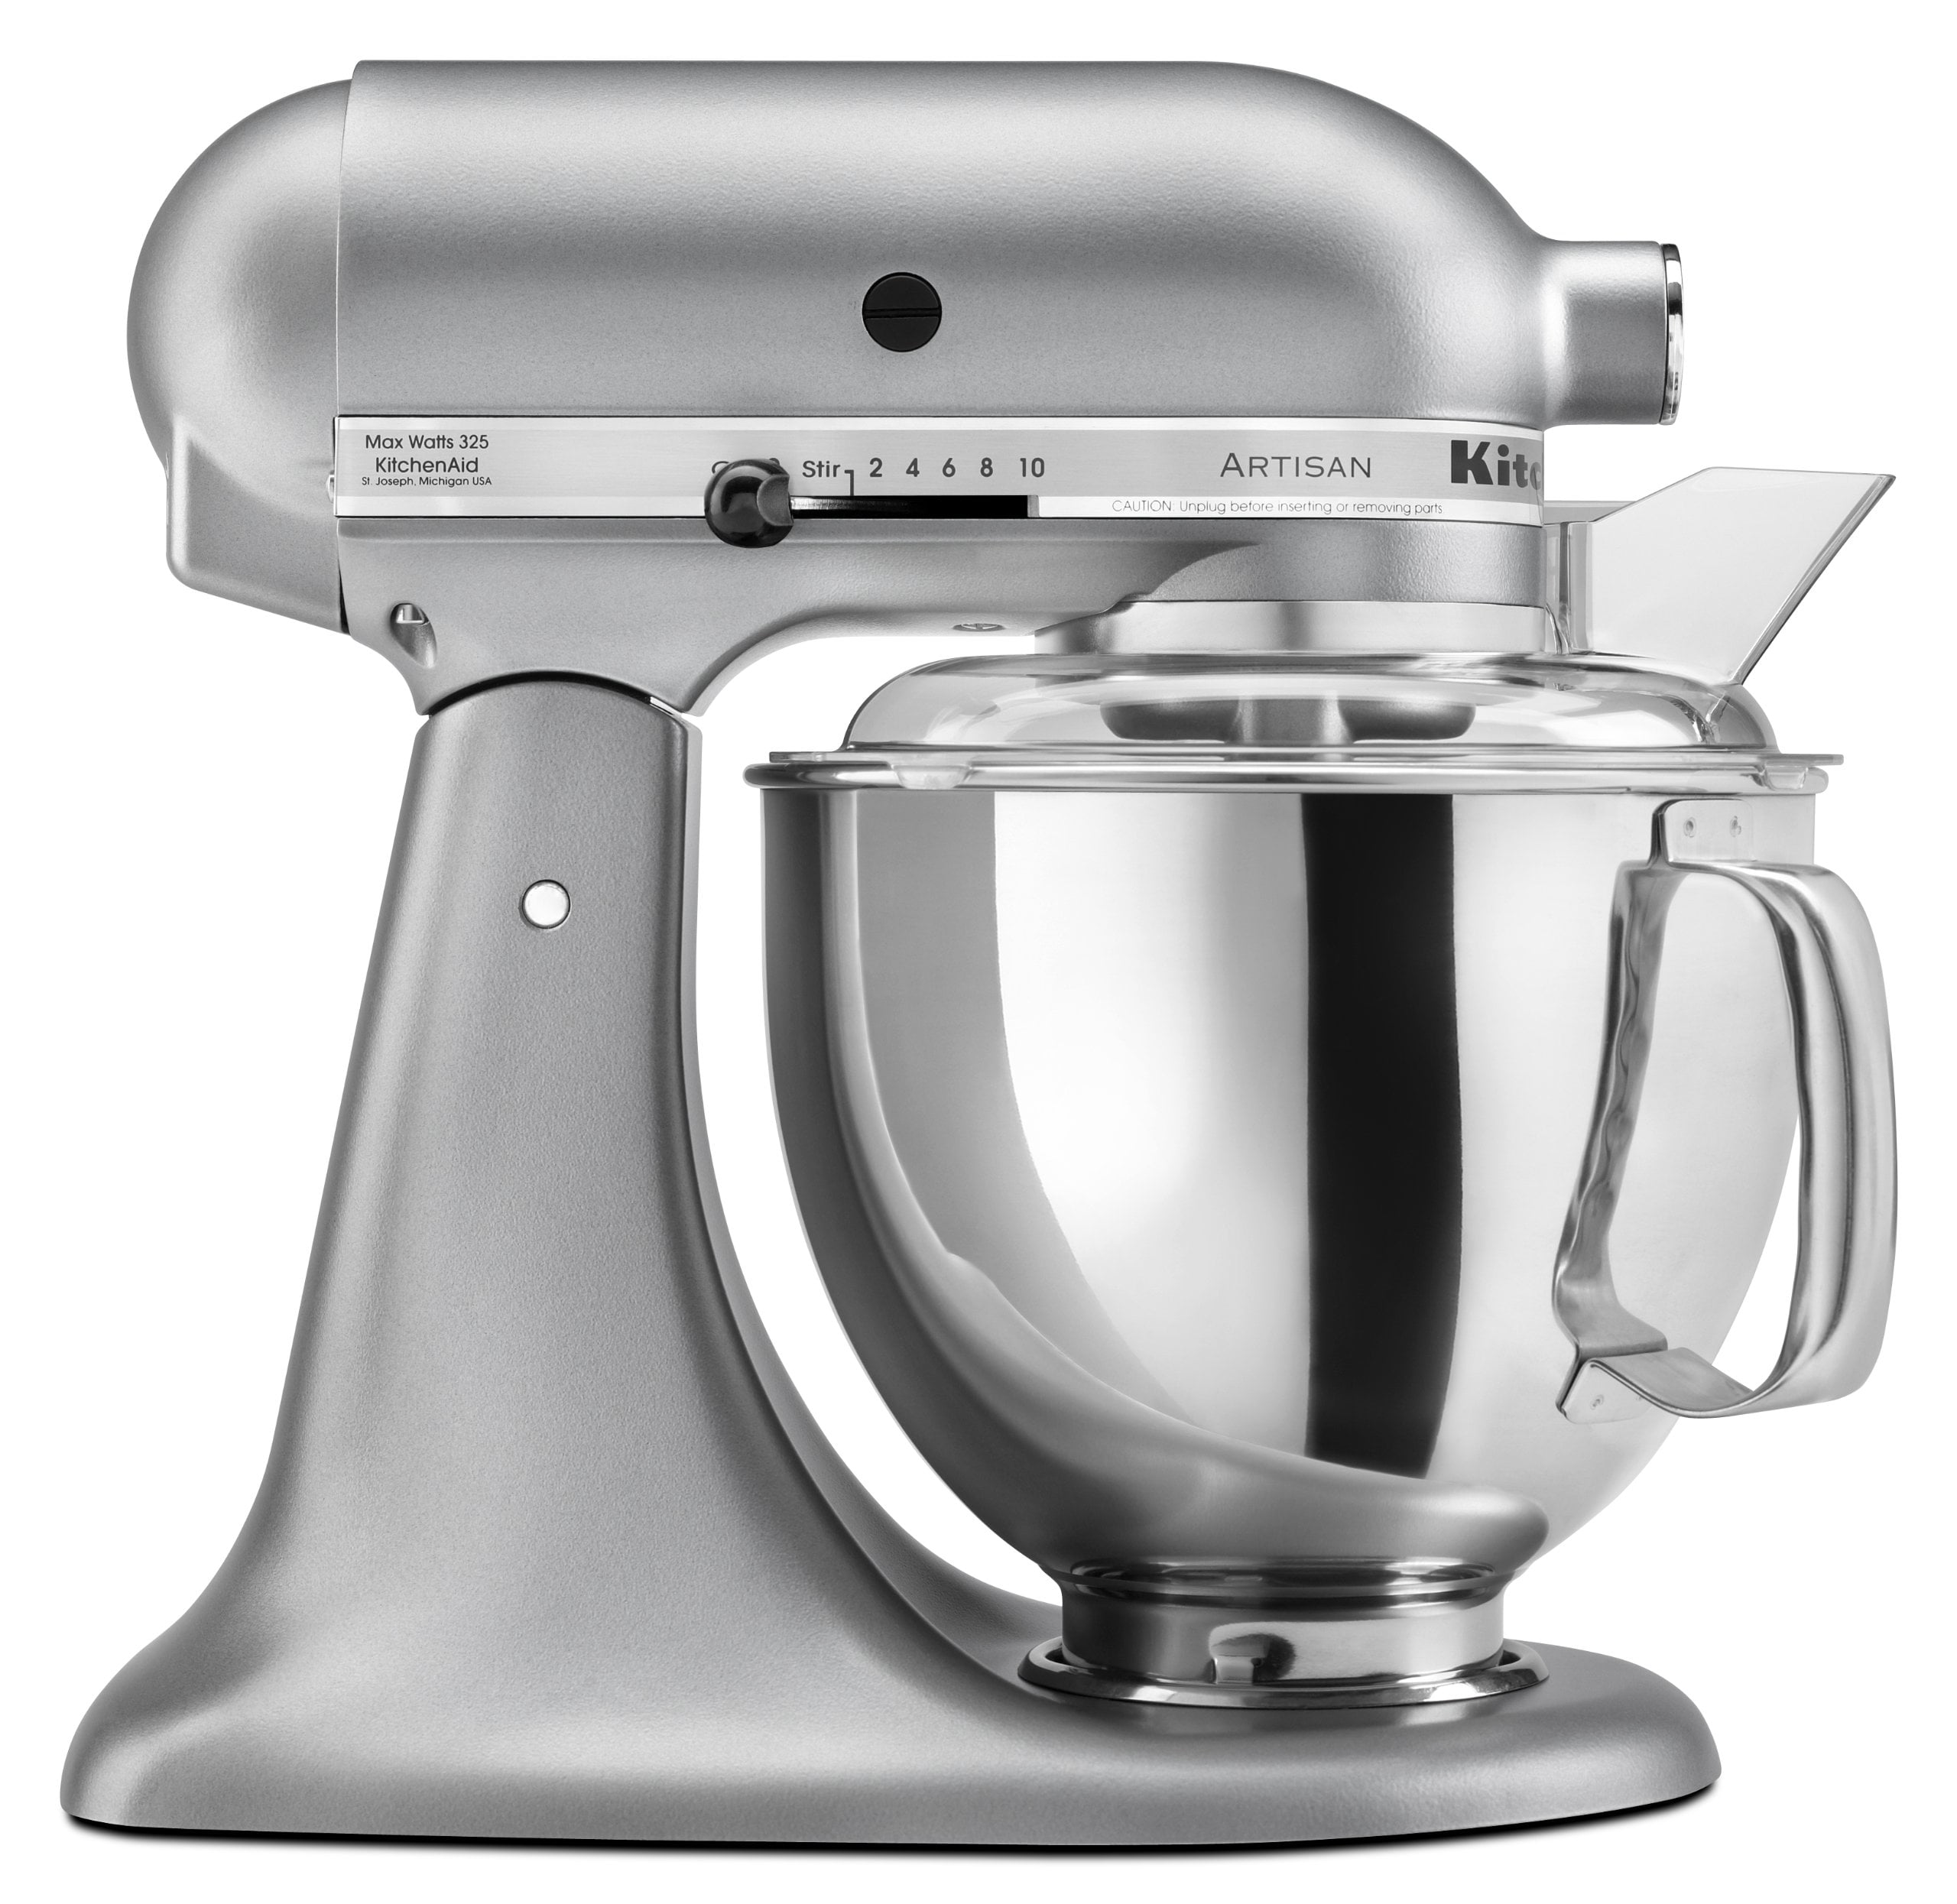 Once upon a time, you could polish silver with a KitchenAid mixer - CNET